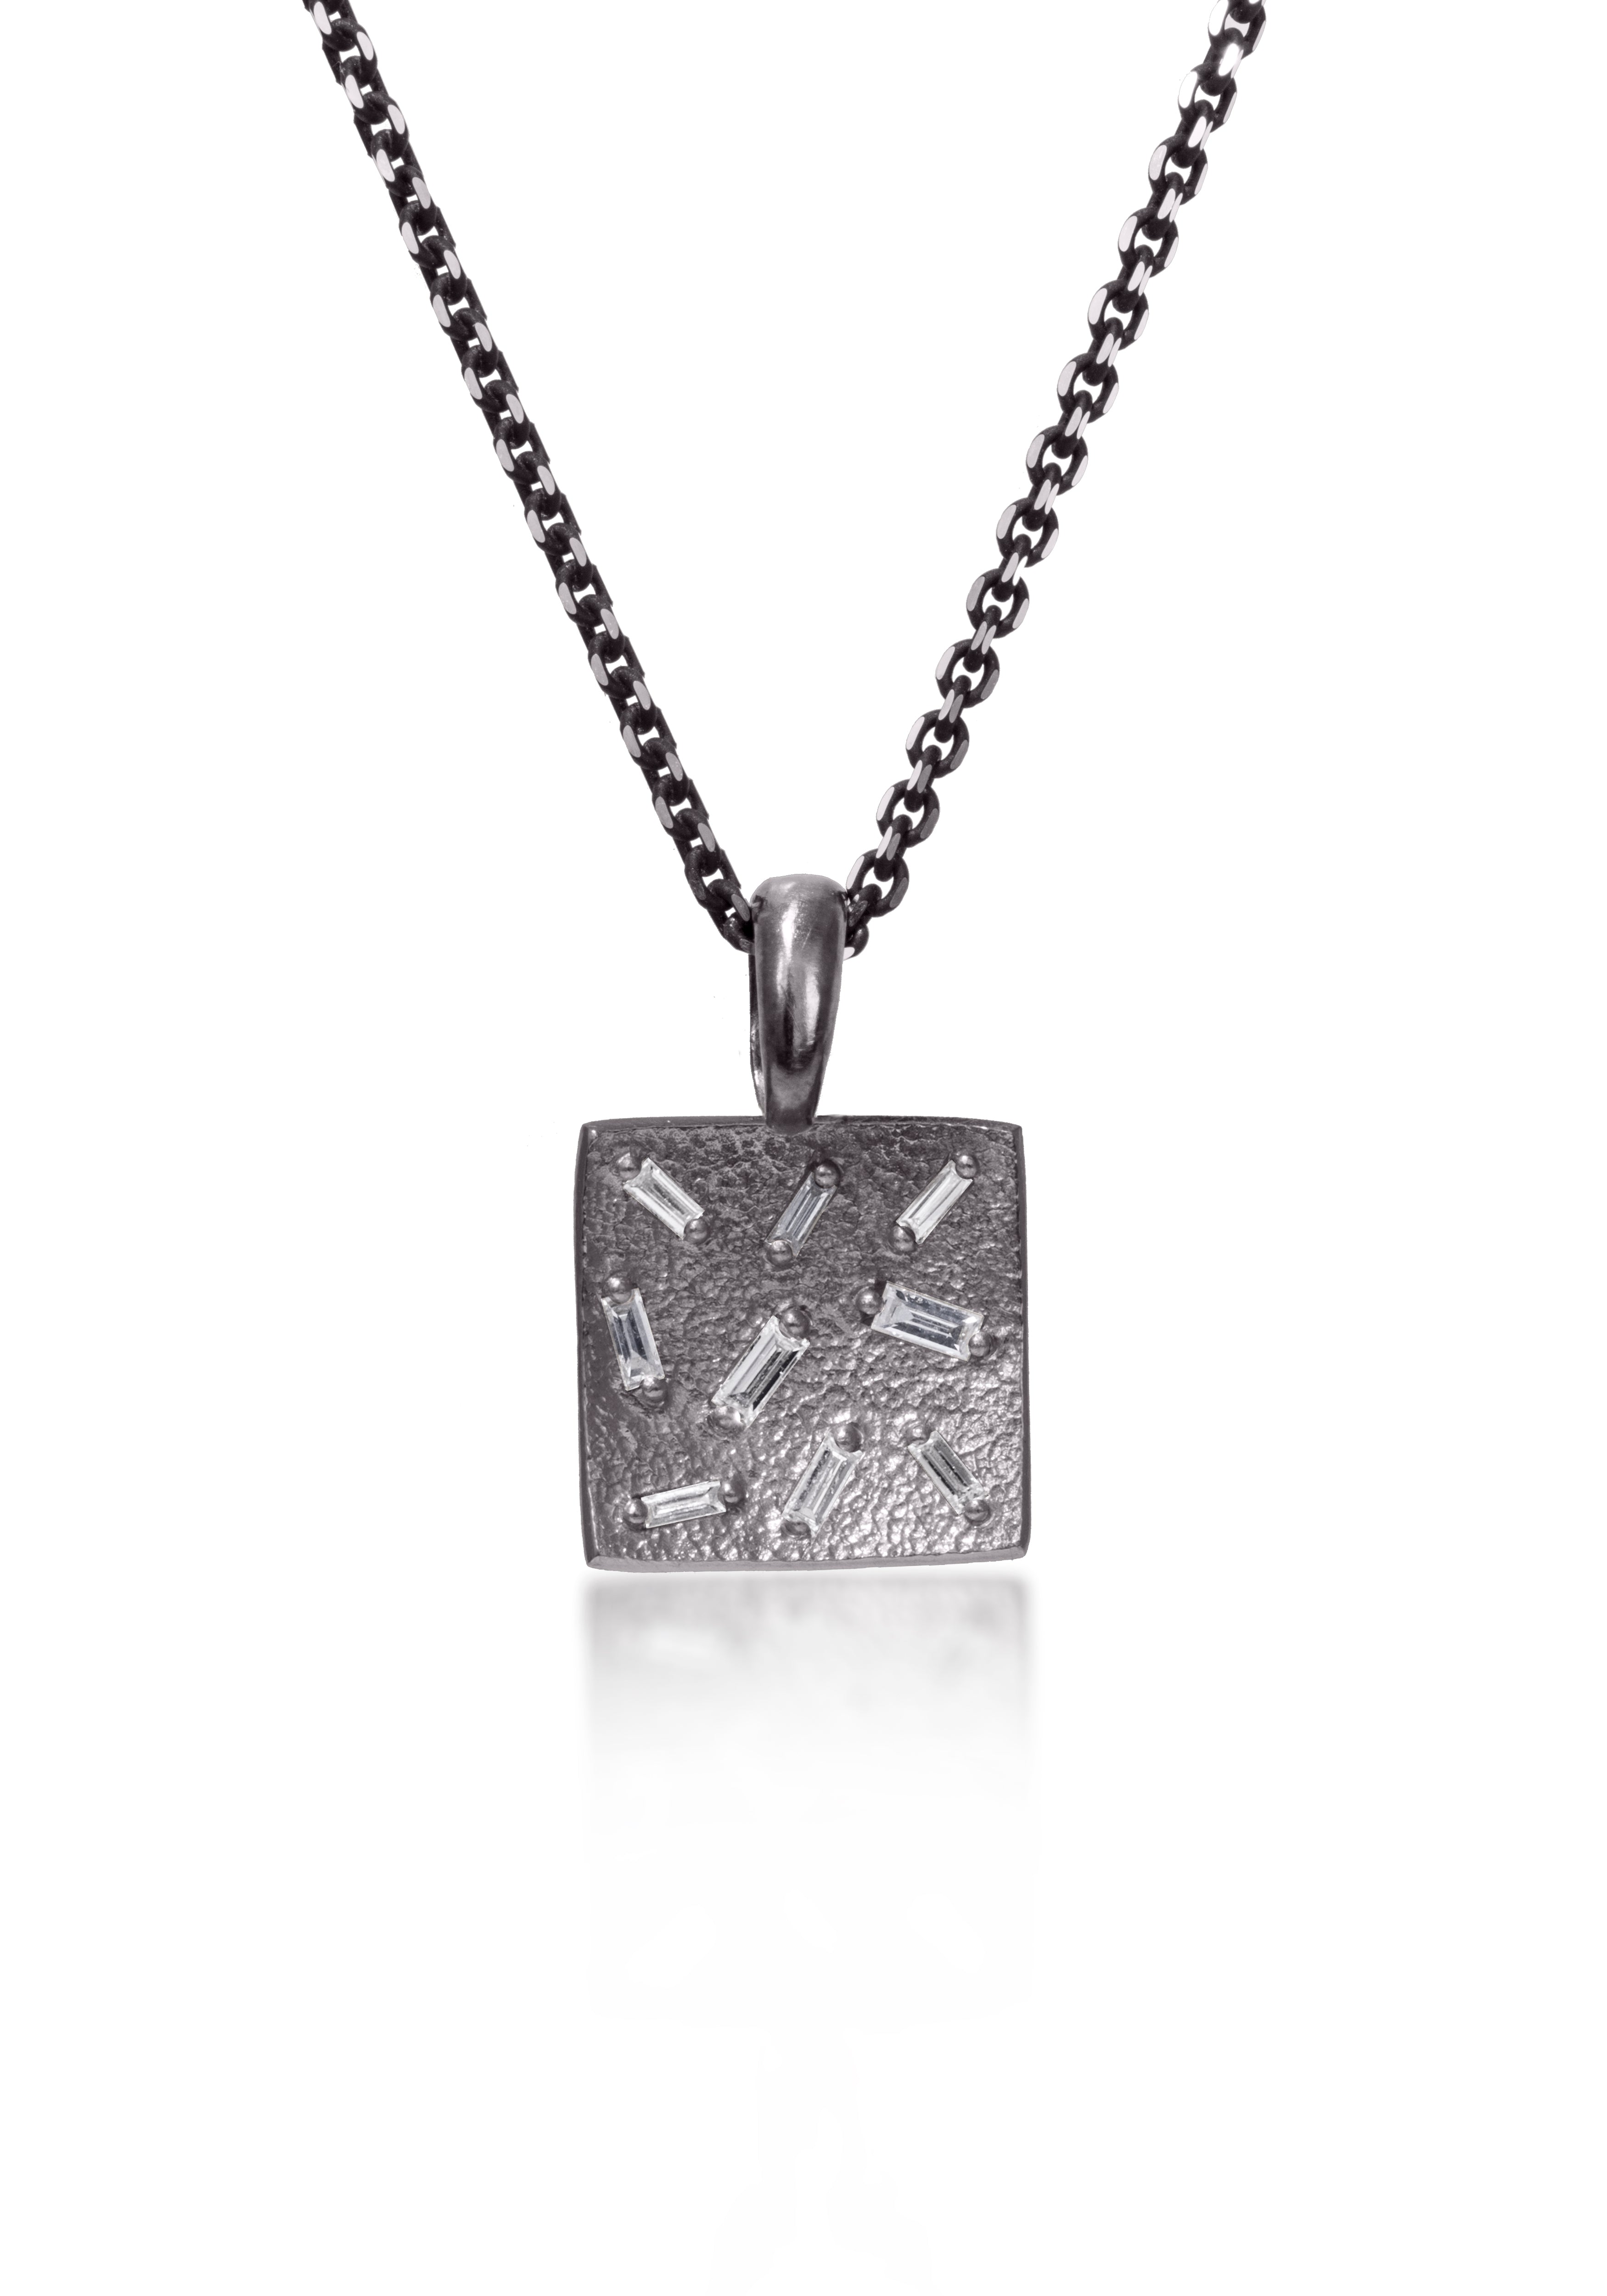 This stunning, small square pendant is set with 9 white diamond baguettes. Richly textured to shimmer in the light, this piece is available in three color ways, oxidized silver, 18k gold and palladium (pictured).  0.245 tcw.